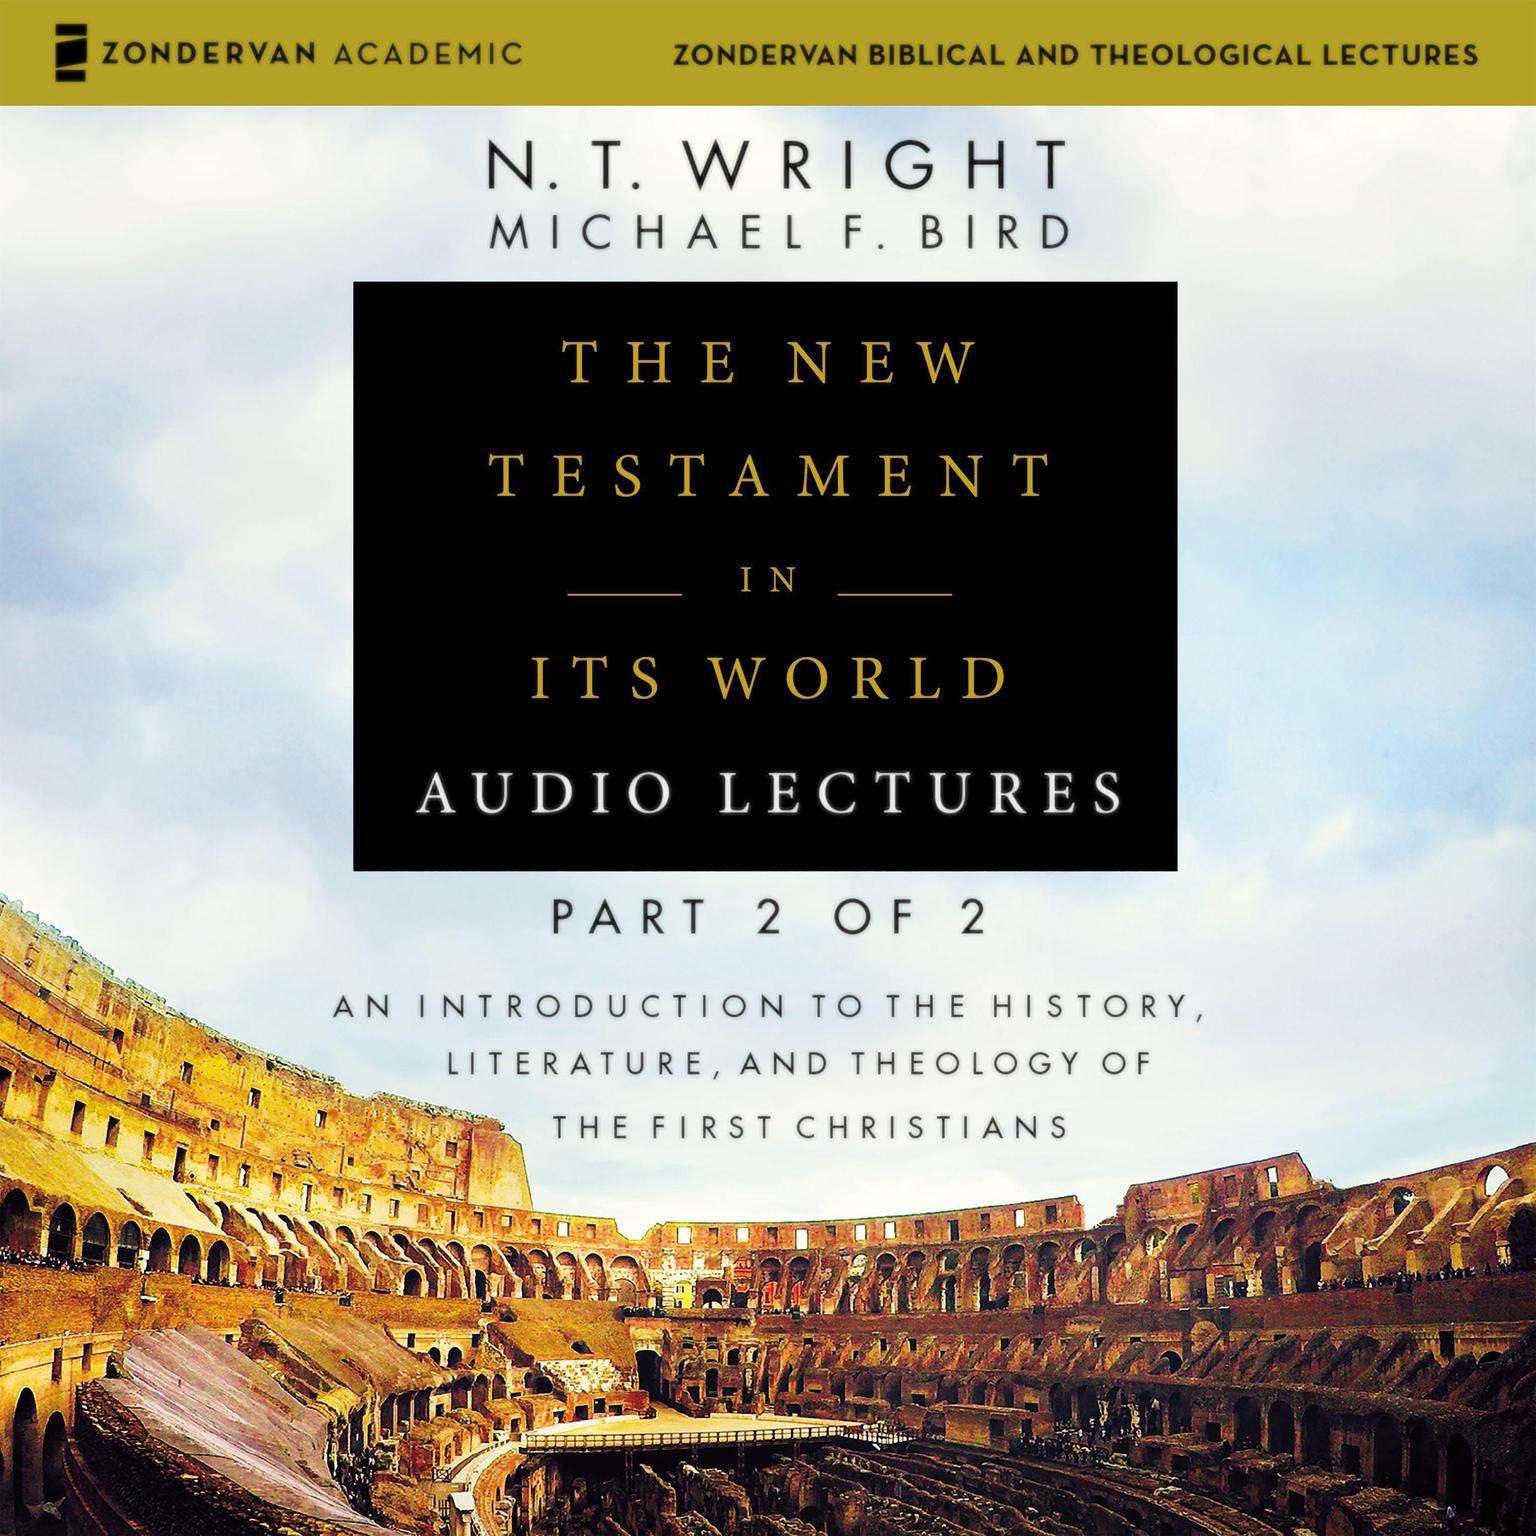 The New Testament in Its World: Audio Lectures, Part 2 of 2: An Introduction to the History, Literature, and Theology of the First Christians Audiobook, by N. T. Wright